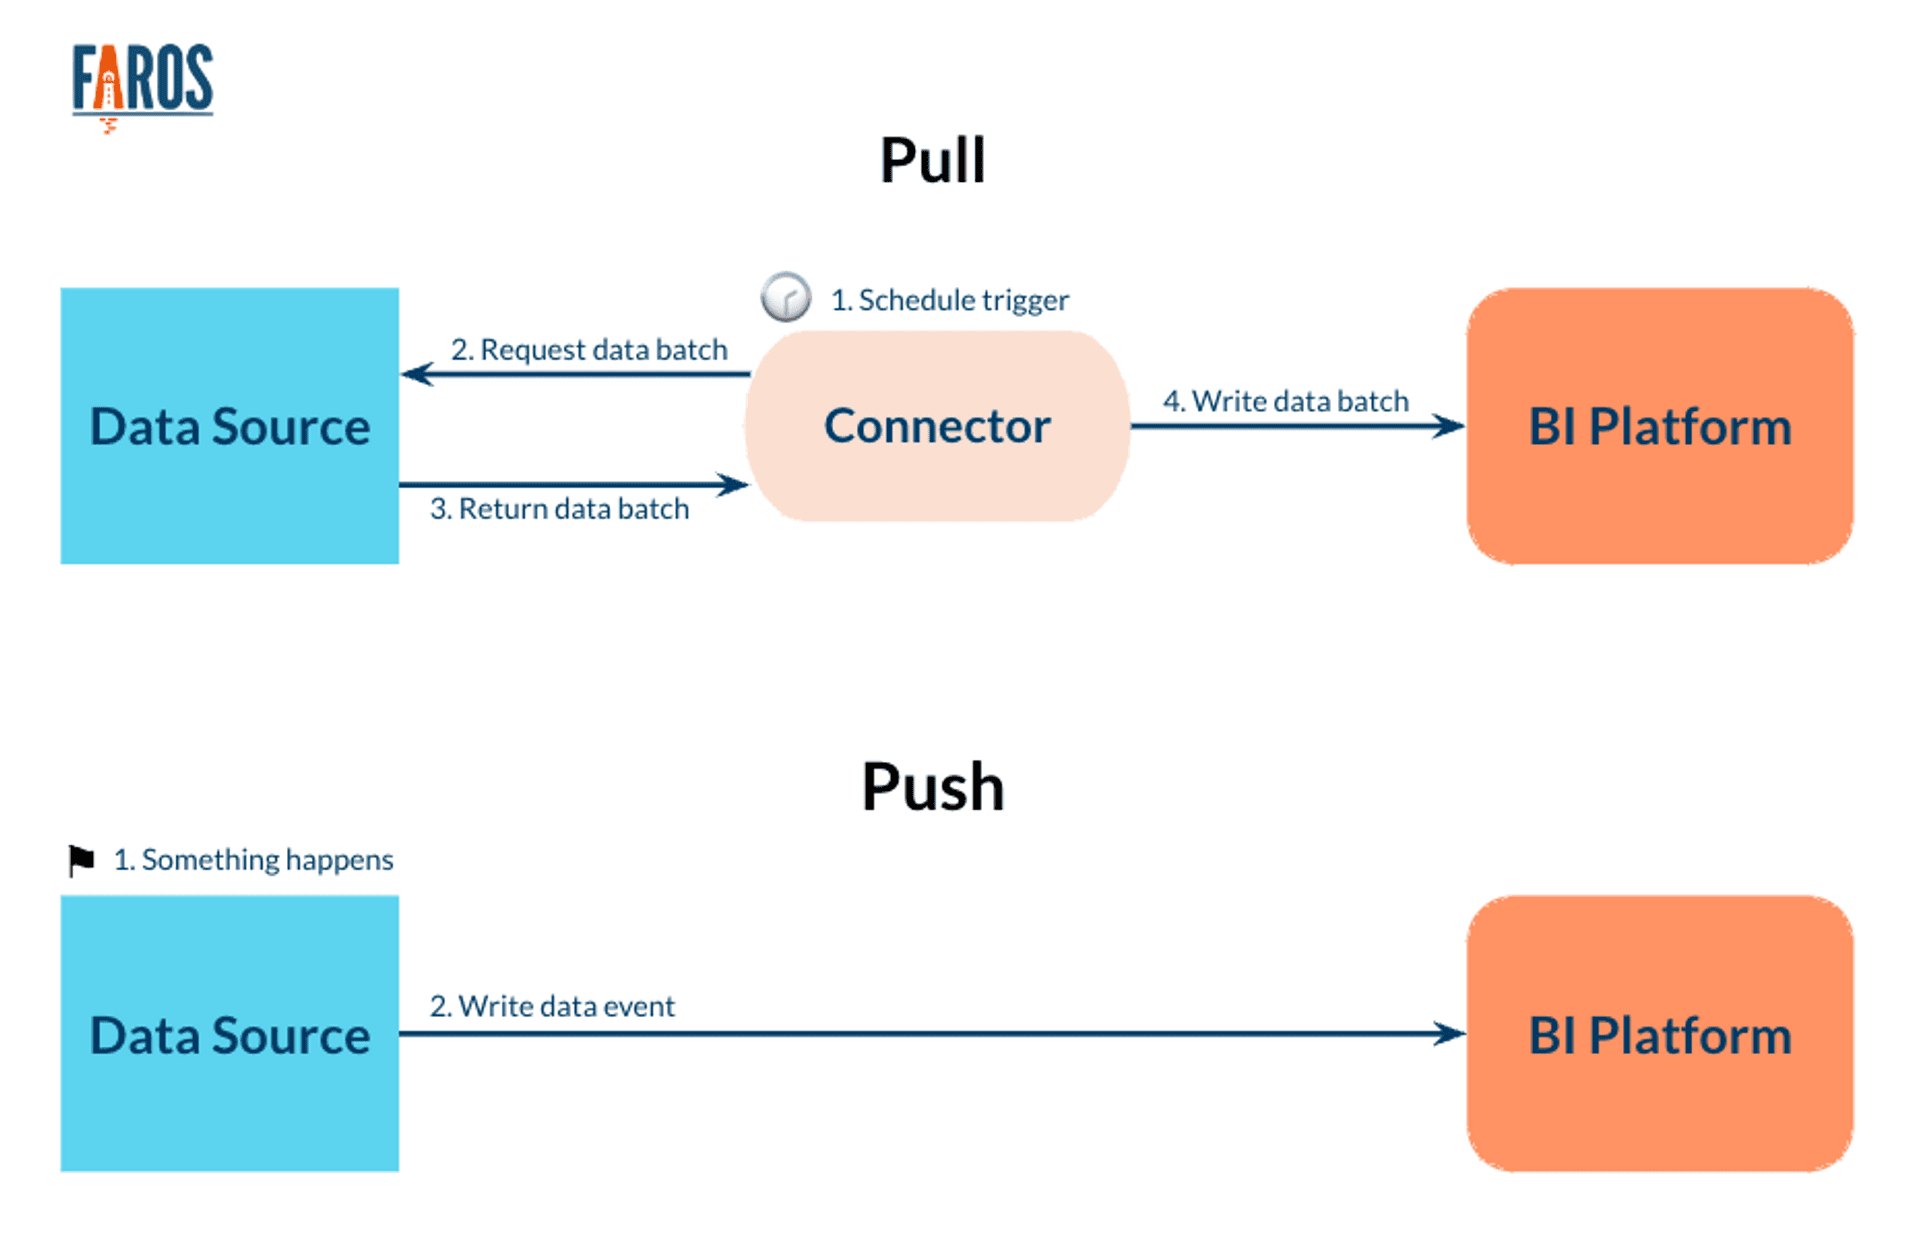 Diagram shows the difference between a pull and push method of populating data into a BI Platform. In the Pull method, a connector requests a data batch based on a scheduled trigger, the data source returns the data batch, and the connector writes the data batch to the BI Platform. In the push method, when an event happens on the data source, the data source writes the data event to the VI Platform.